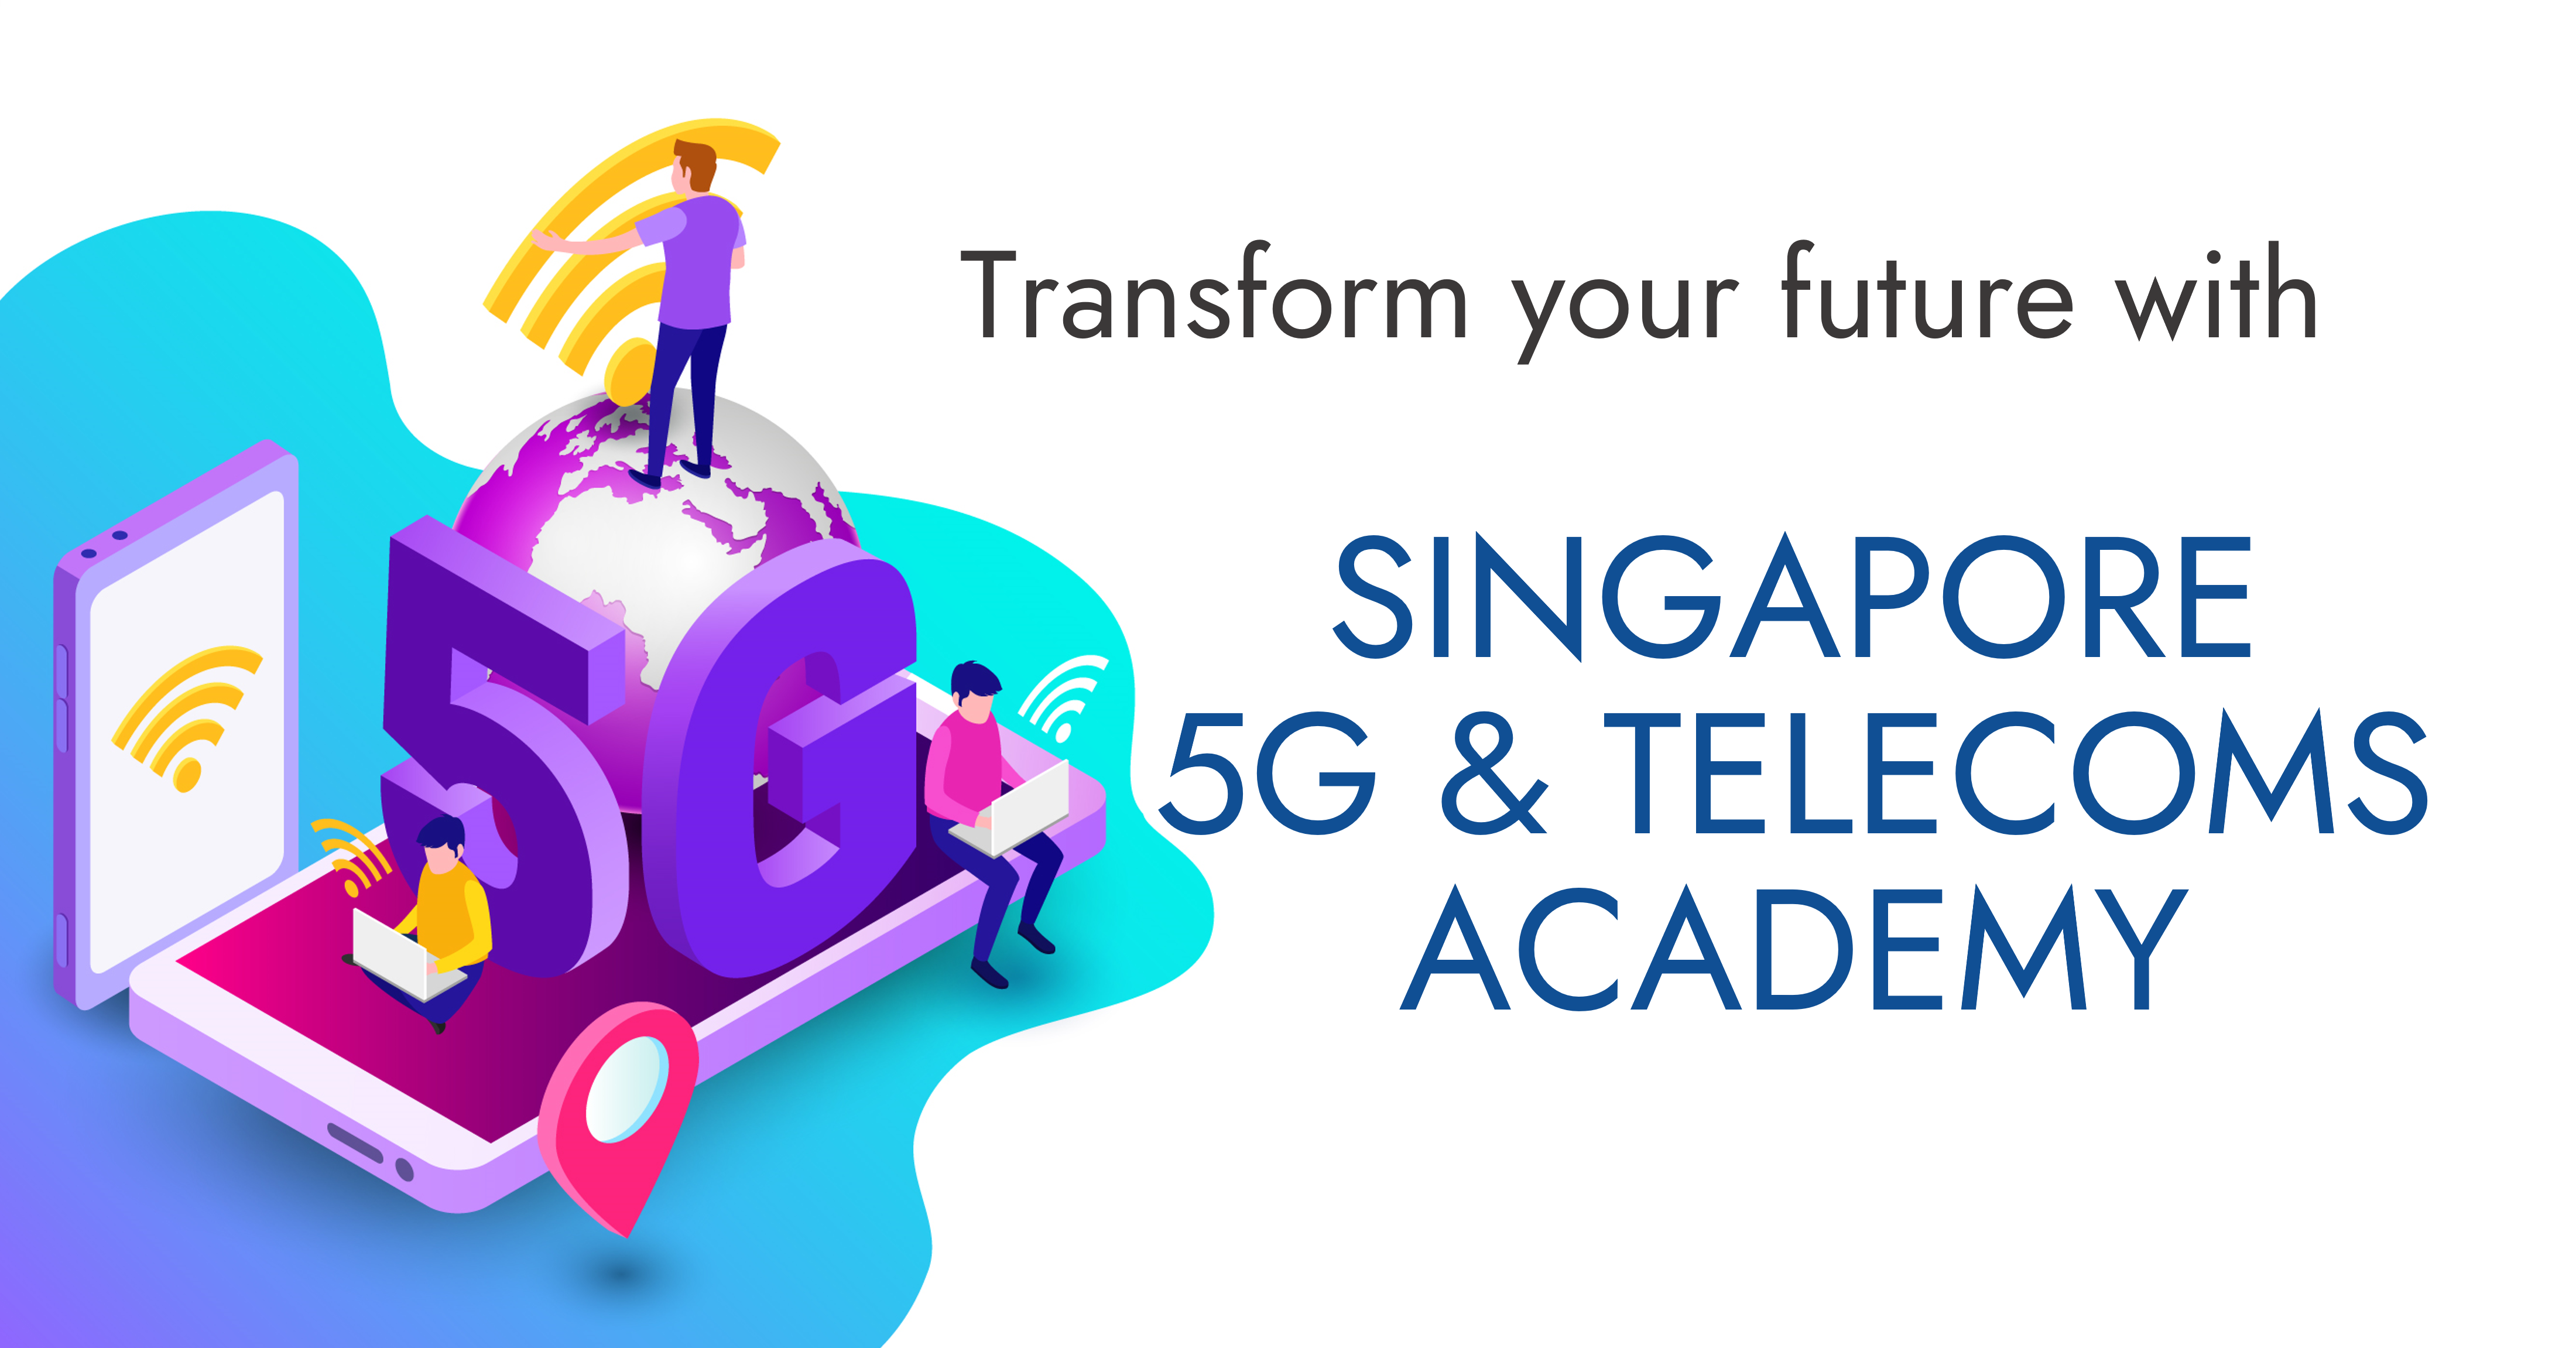 A partnership between Singapore 5G and the Telecoms Academy in collaboration with IMDA for the development of talent and programmes